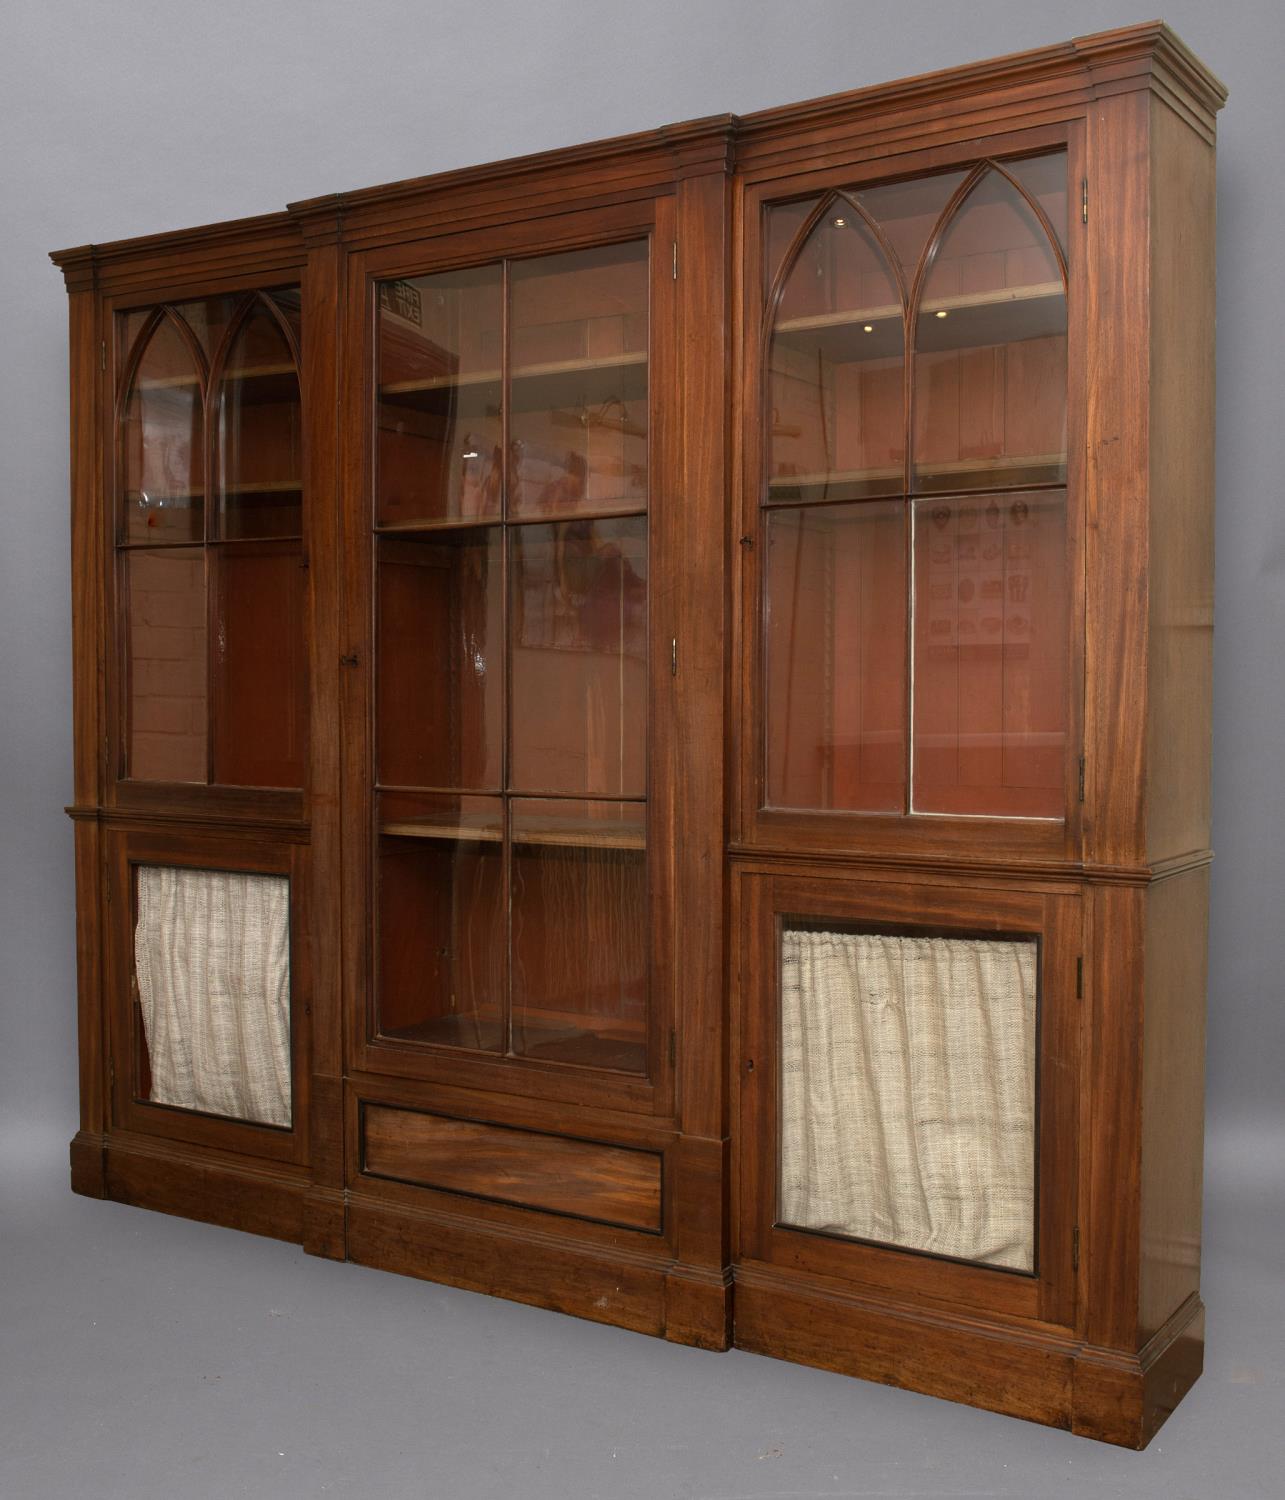 A LATE GEORGE III MAHOGANY LIBRARY BOOKCASE. With a broad central door with six glass panels